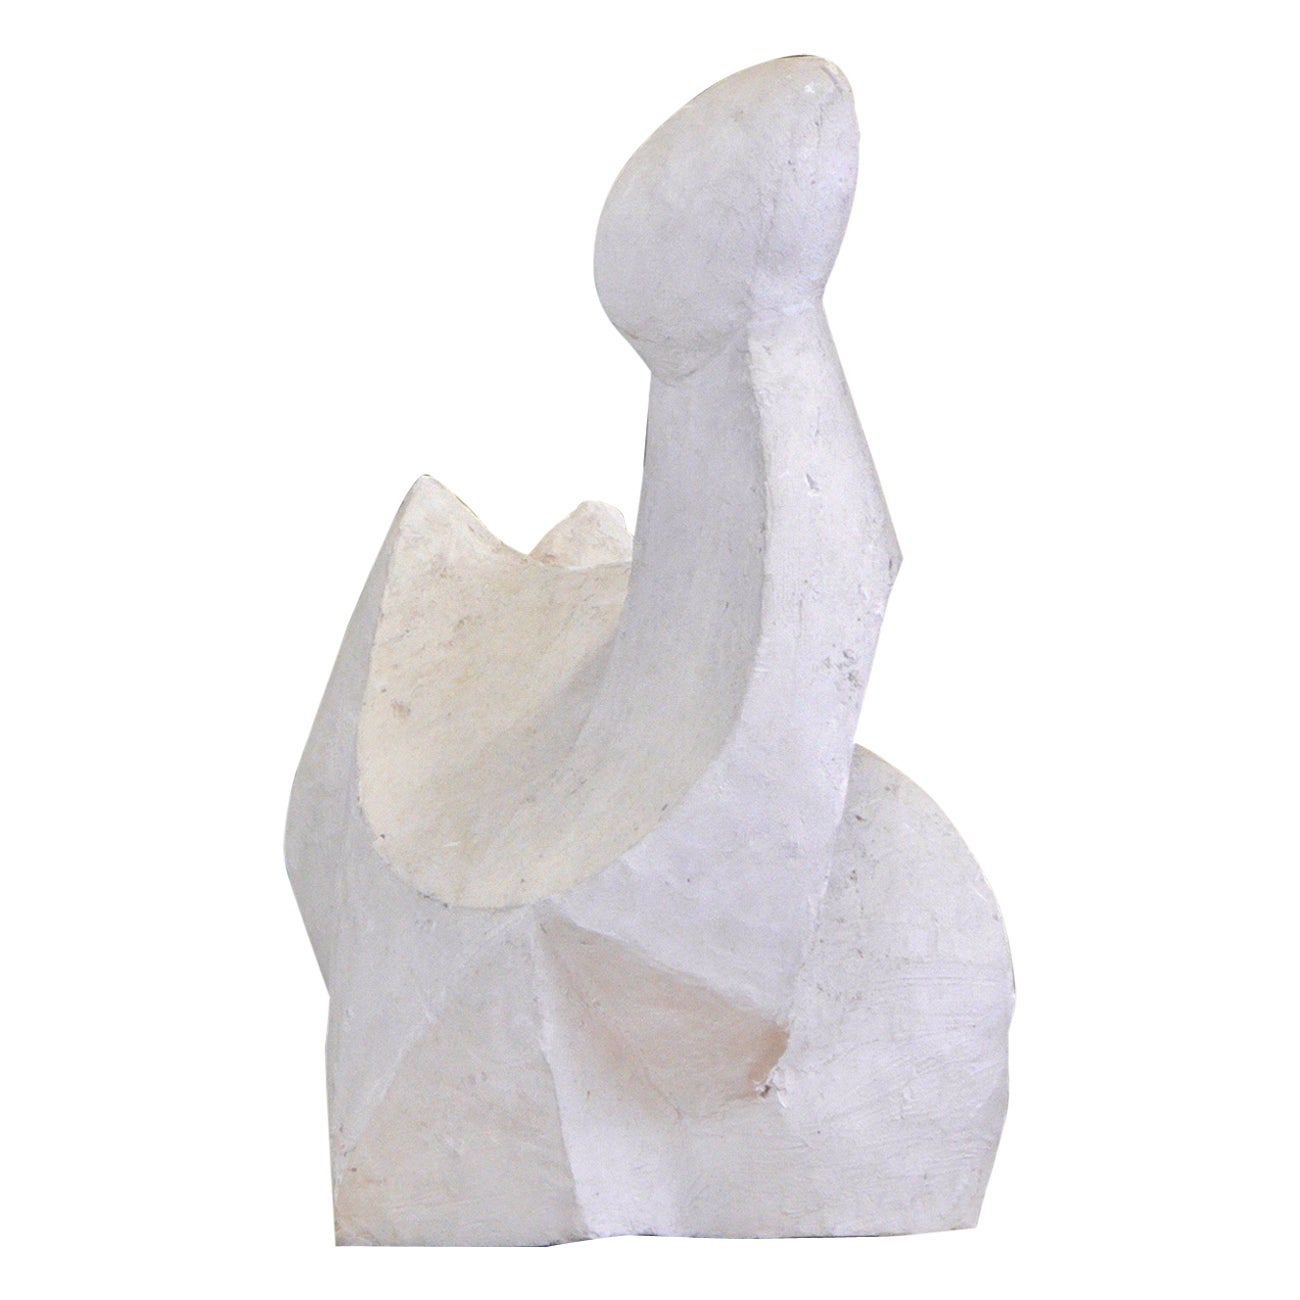 French abstract plaster sculpture - 1950.